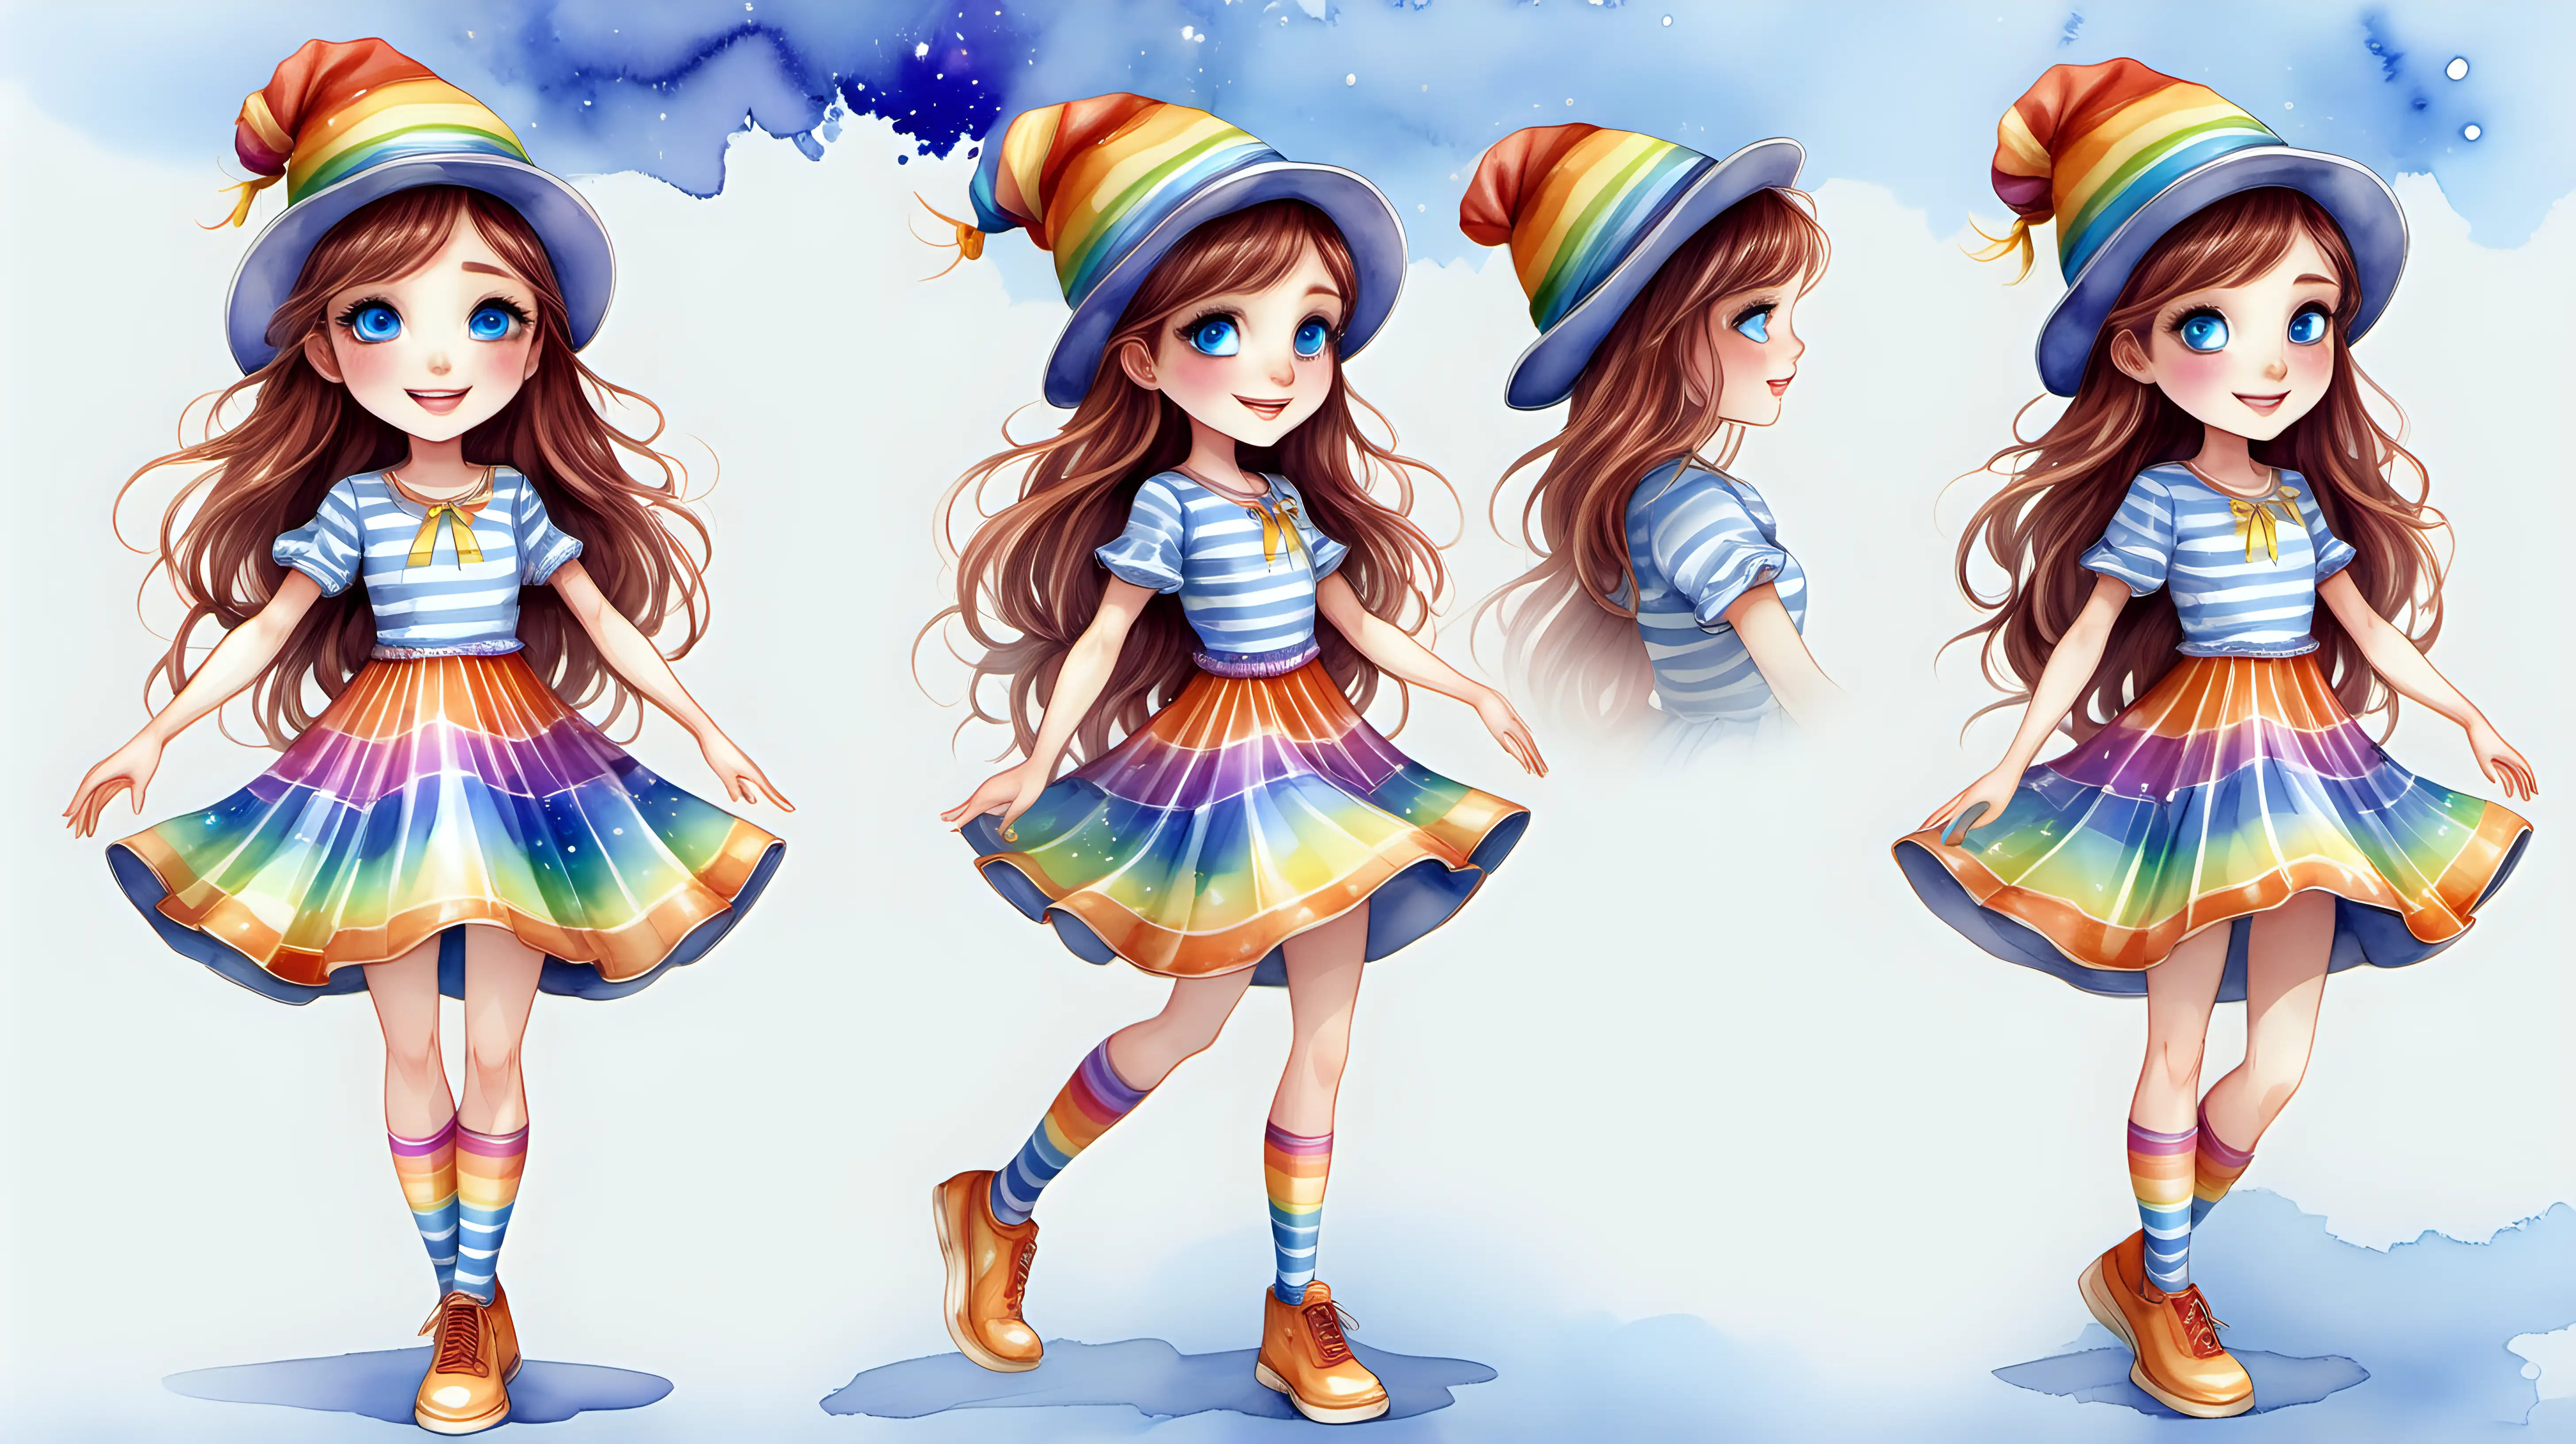 very vivid image of Lila Luise She has long, chestnut brown hair that flows freely, often seen dancing in the breeze. Her eyes are a striking shade of blue, reminiscent of a clear summer sky.
Clothing: Lila wears a whimsical hat striped with vibrant colors, like a rainbow. Her outfit is playful and colorful, suitable for an adventurous young girl. She sports a pair of shoes that sparkle as if they were sprinkled with stardust, adding a magical touch.
Expression: Lila’s face is often lit up with a bright, curious smile, reflecting her adventurous and joyful spirit. watercolor style character sheet, full body